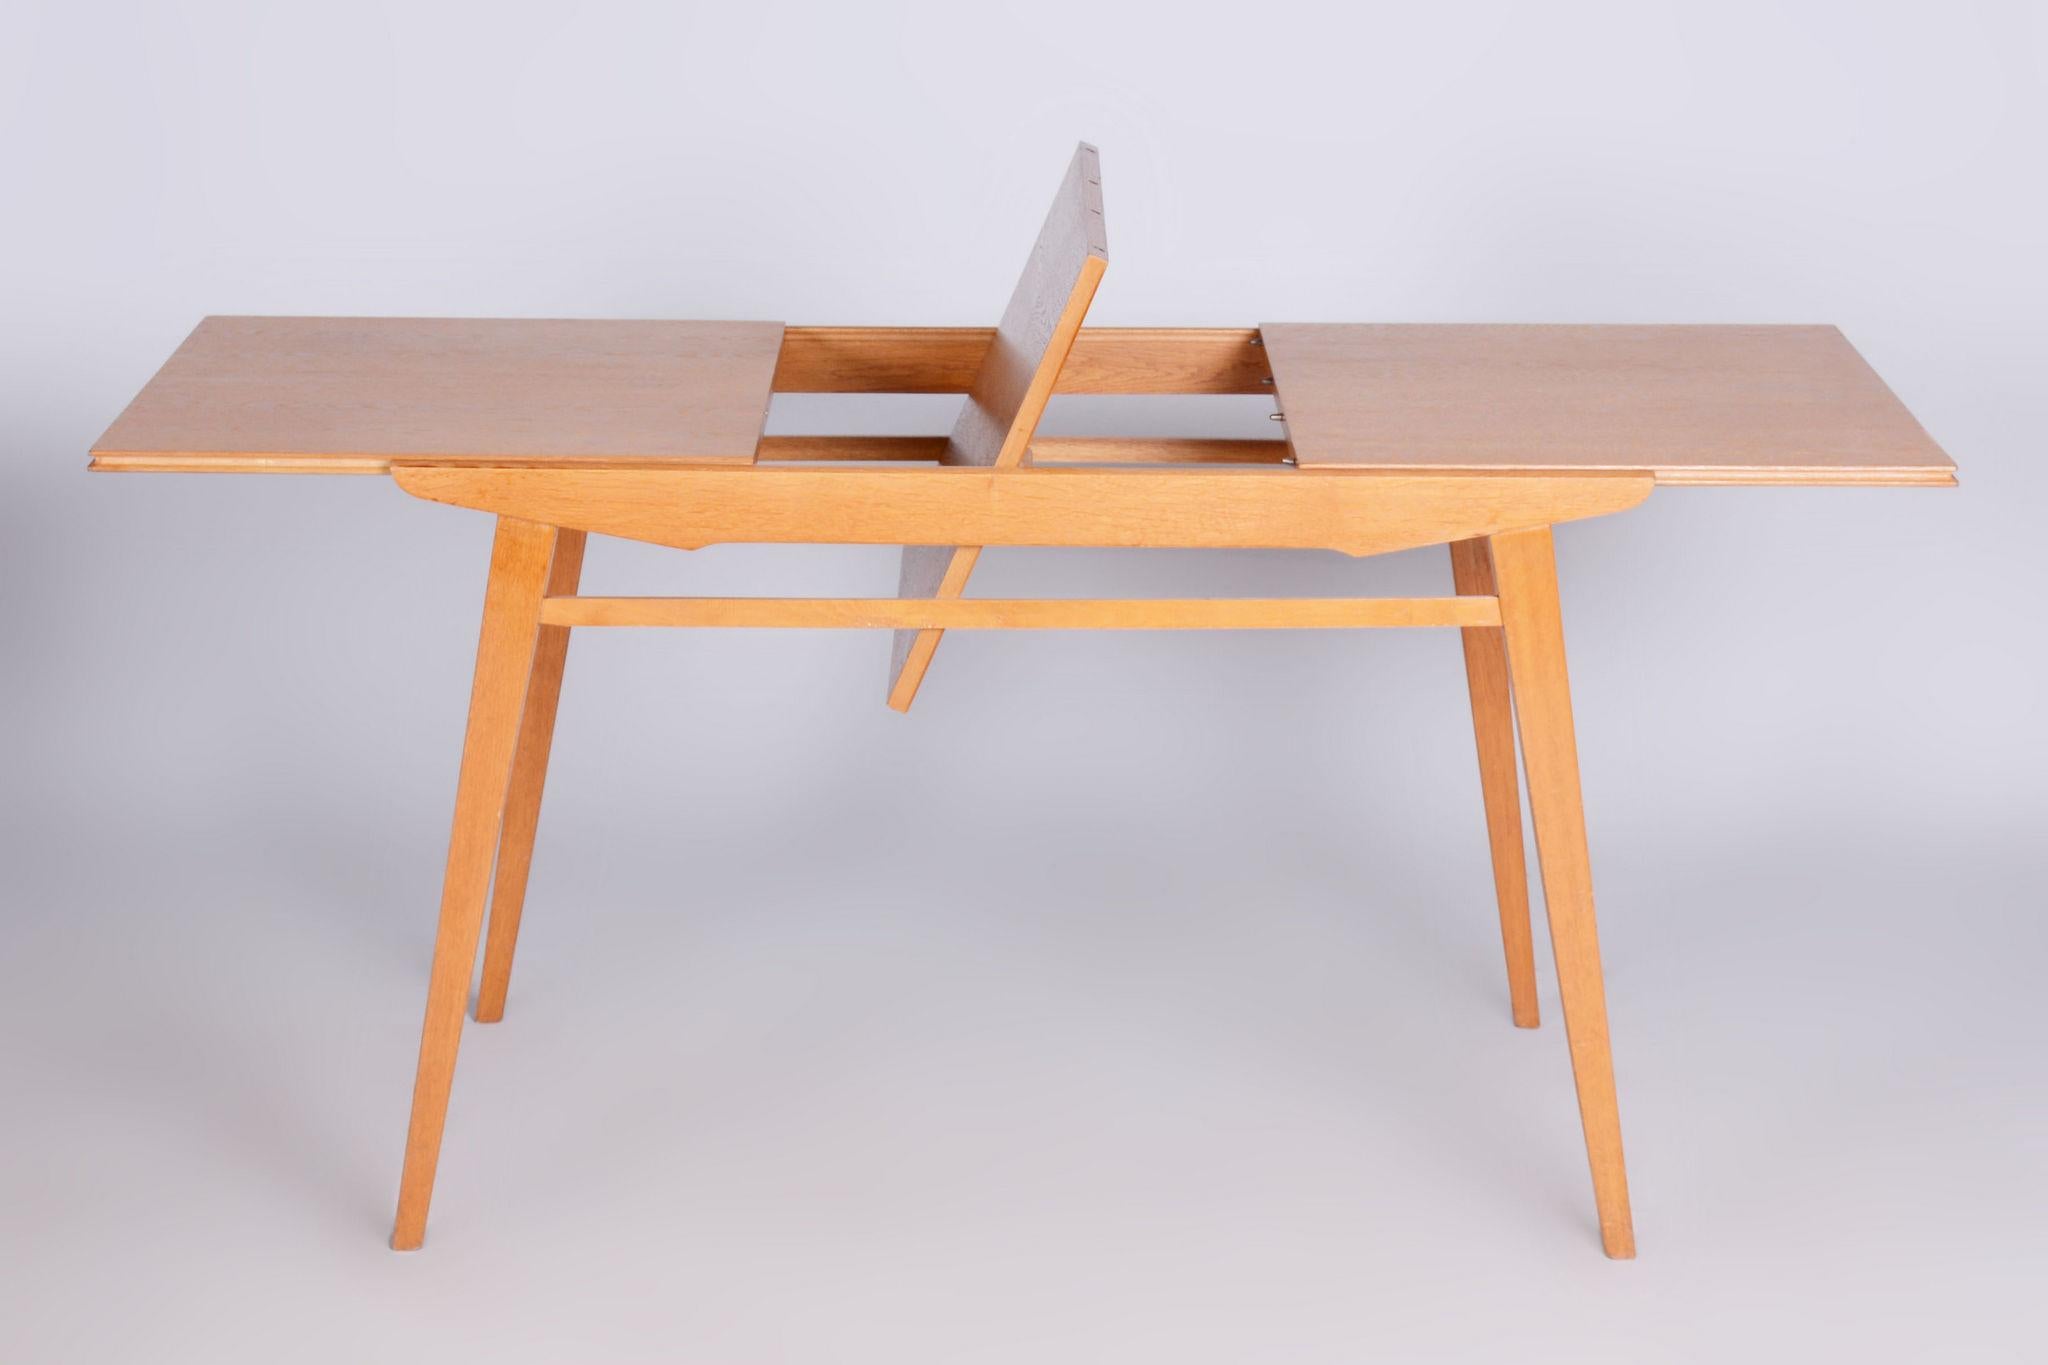 Restored Midcentury Oak Extendable Dining Table, Revived Polish, Czechia, 1950s For Sale 5